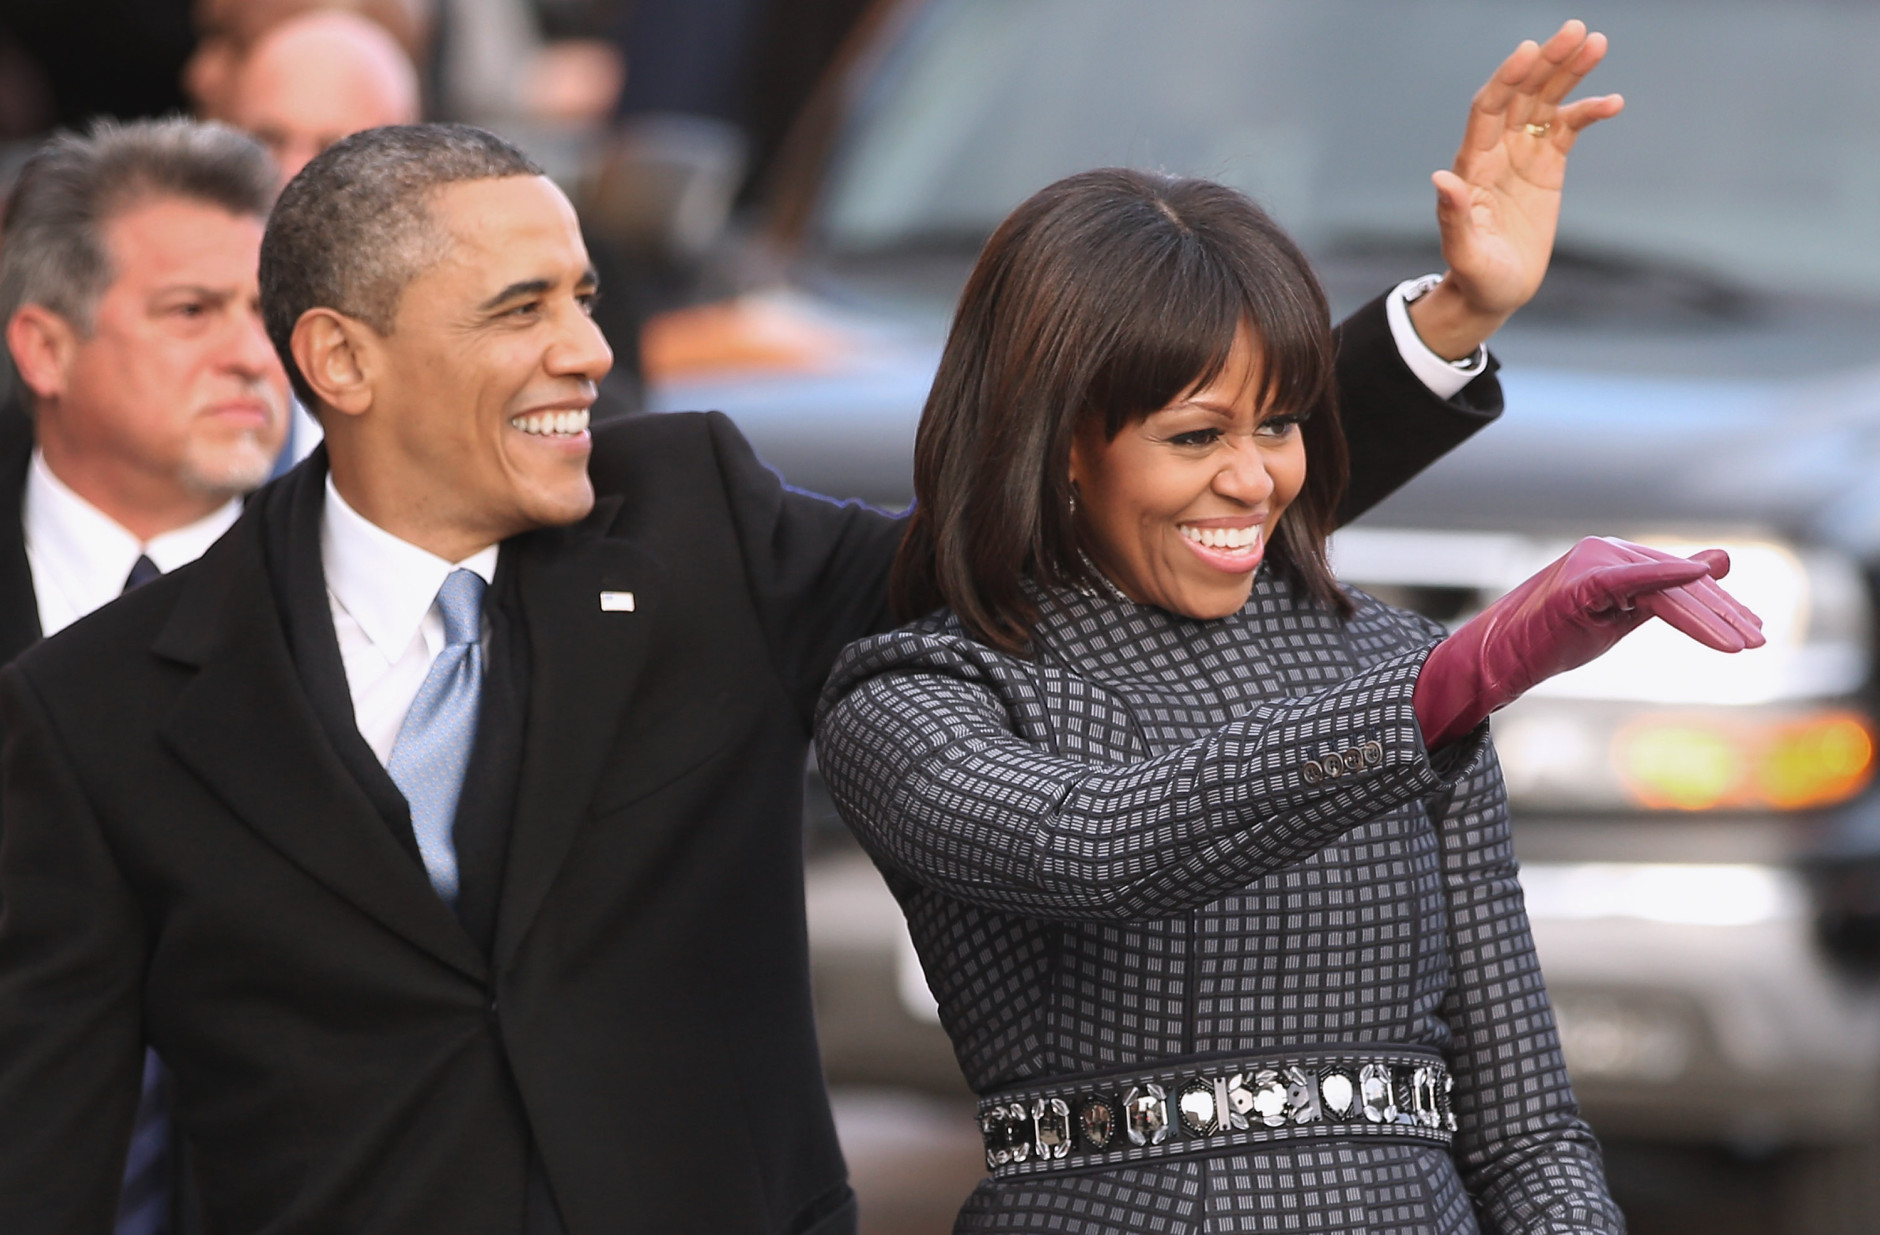 WASHINGTON, DC - JANUARY 21:  U.S. President Barack Obama and first lady Michelle Obama wave to supporters as they walk the inaugural parade route down Pennsylvania Avenue January 21, 2013 in Washington, DC. President Obama took the oath of office earlier in the day during a ceremony on the west front of the U.S. Capitol.  (Photo by Chip Somodevilla/Getty Images)